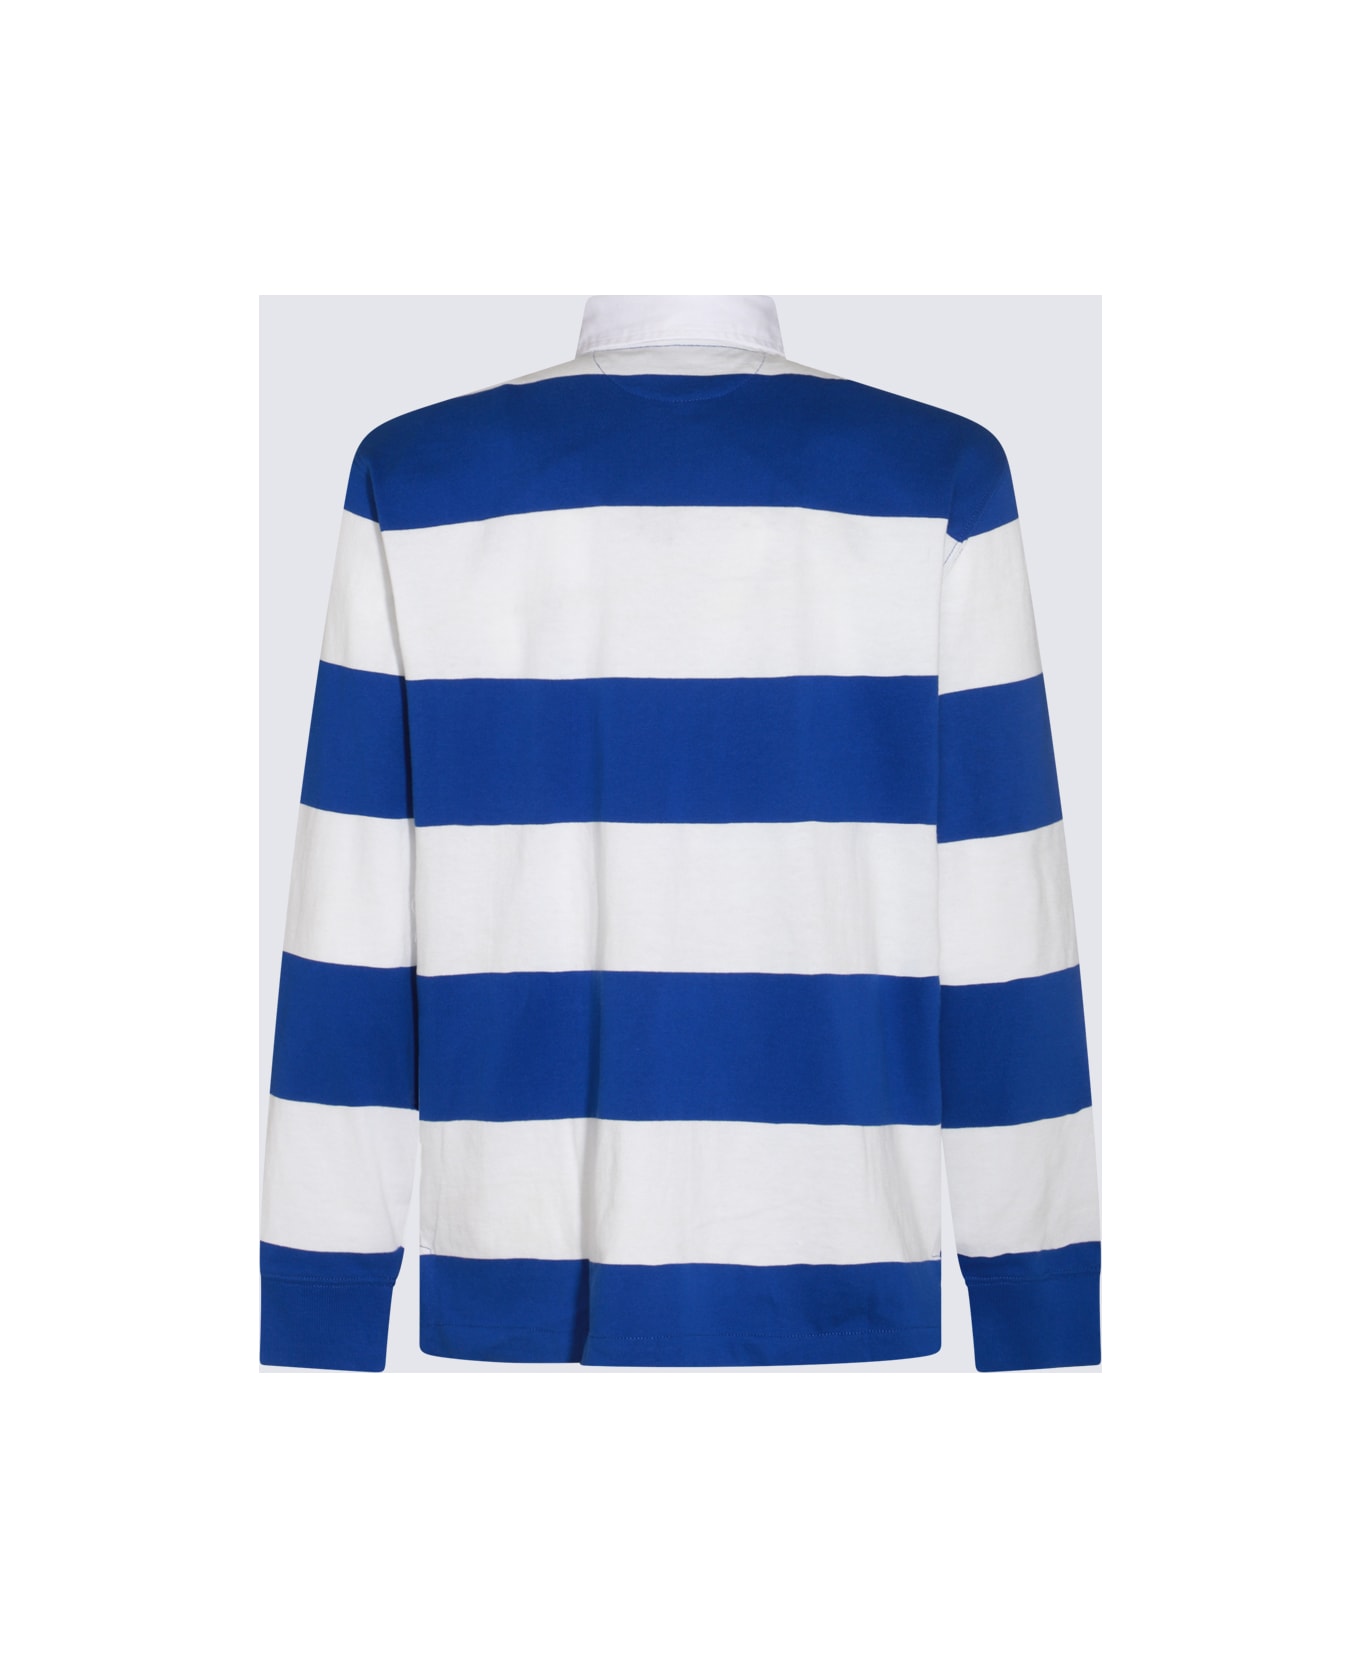 Polo Ralph Lauren White And Blue Cotton Polo Shirt - CRUISE ROYAL/CLS OXFORD WHITE